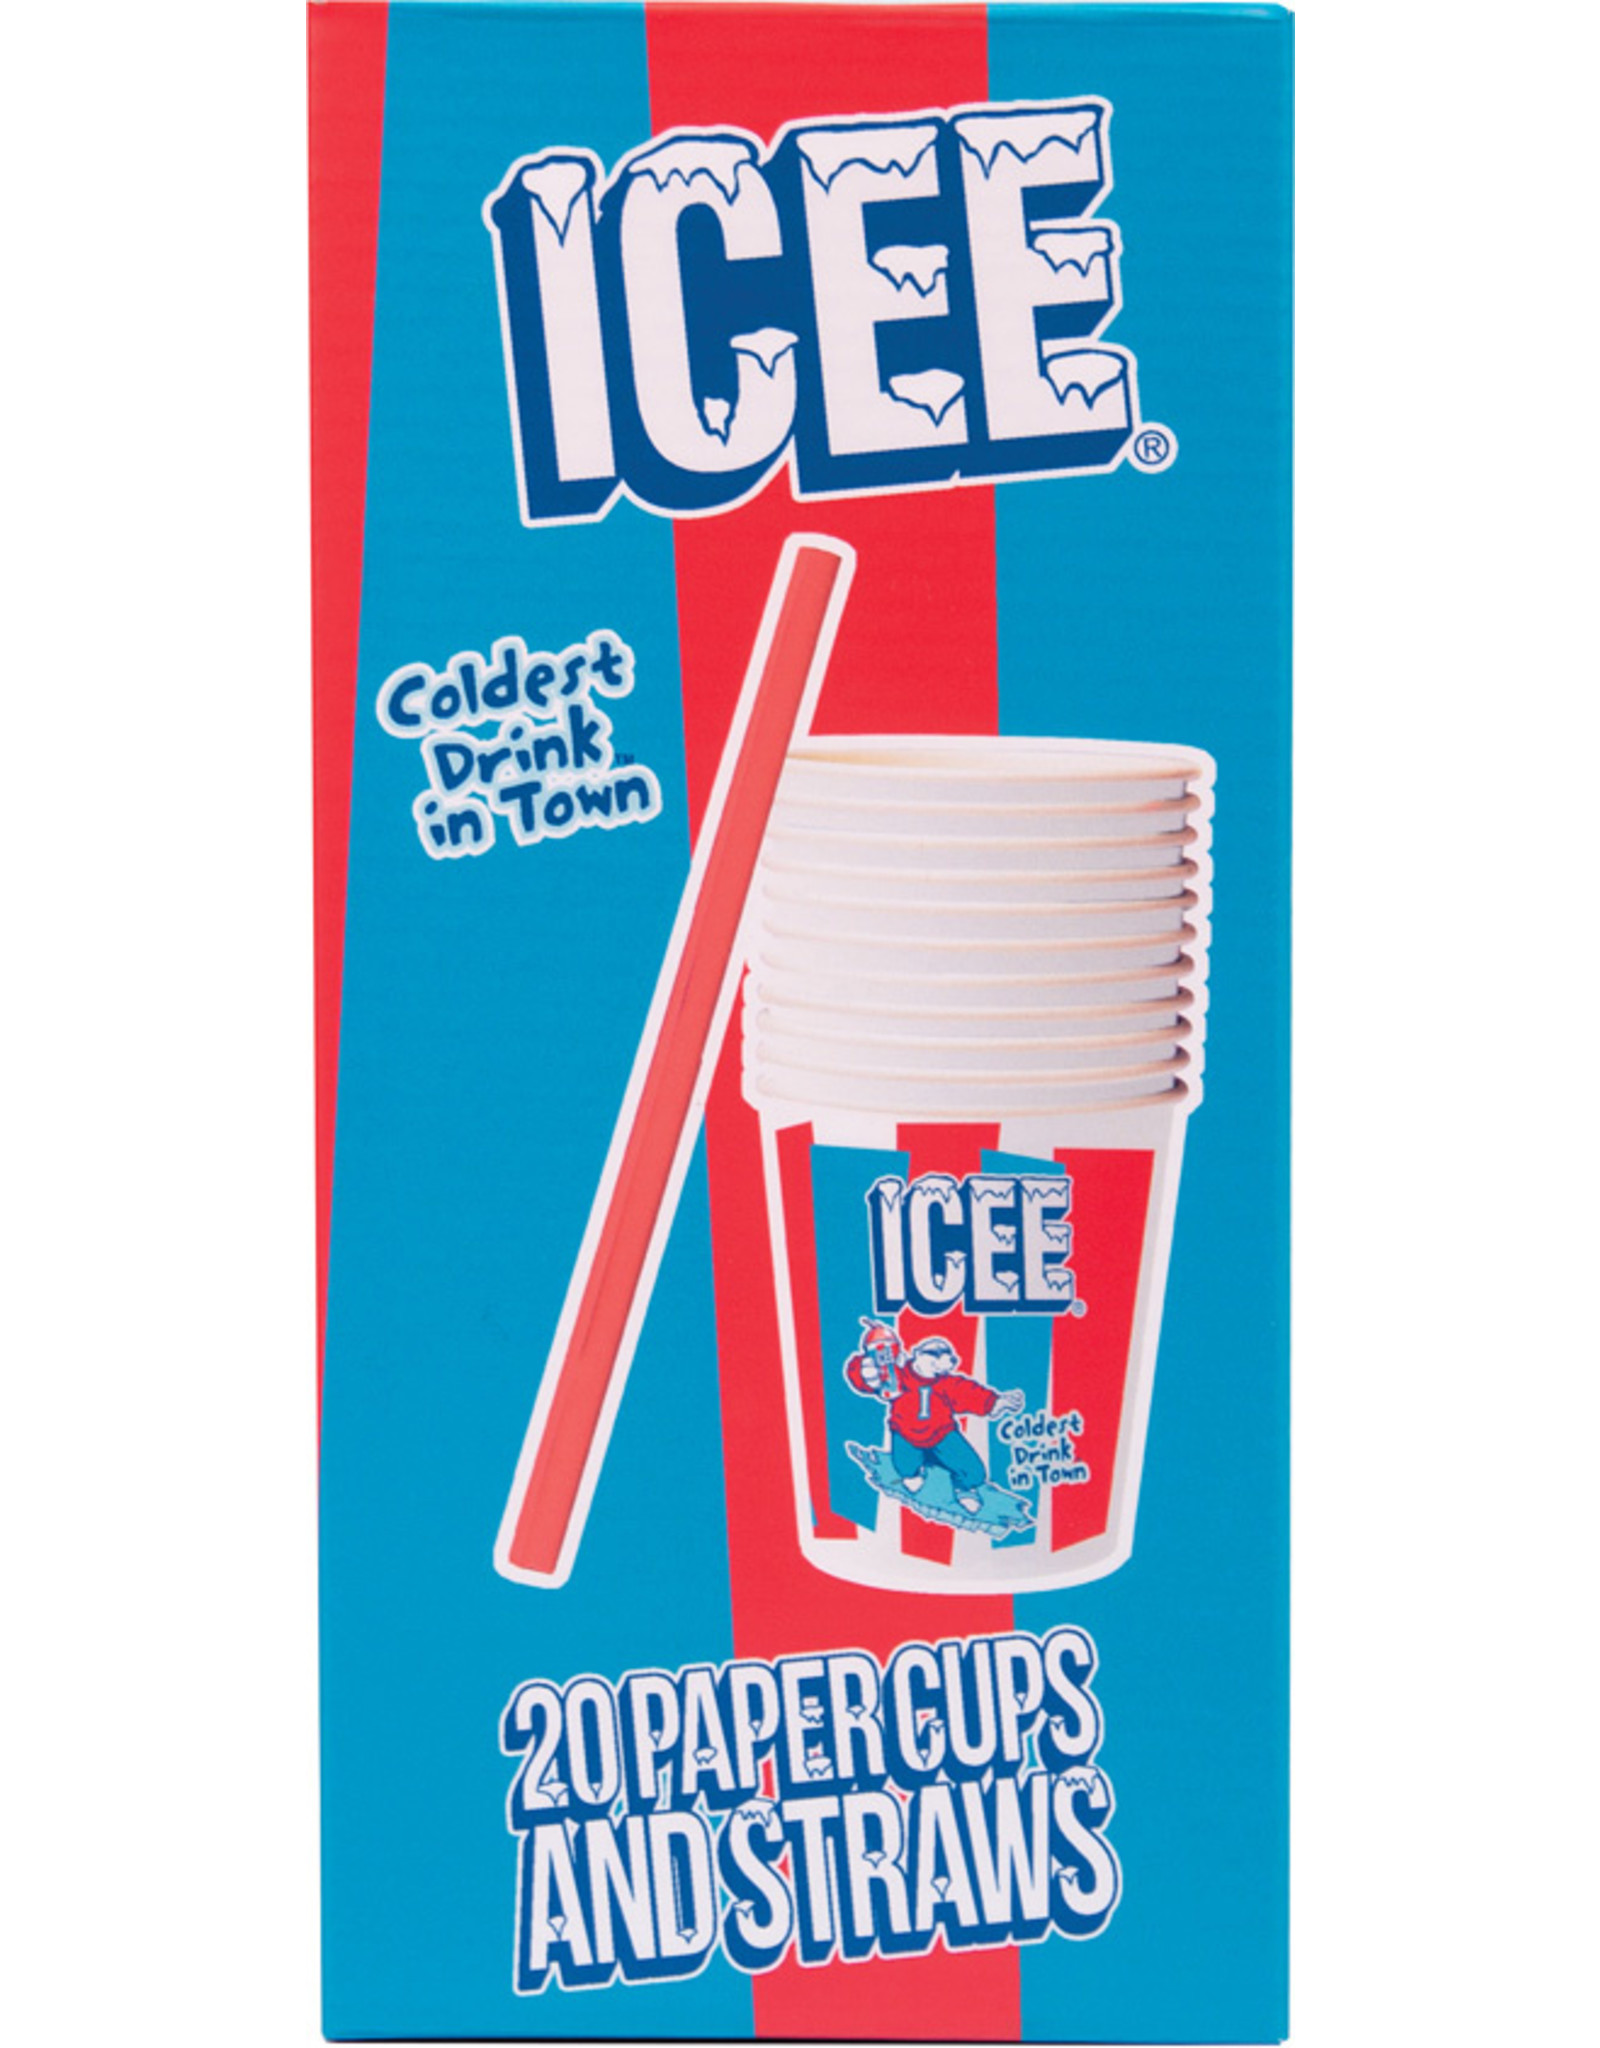 Icee pictures of Who Invented